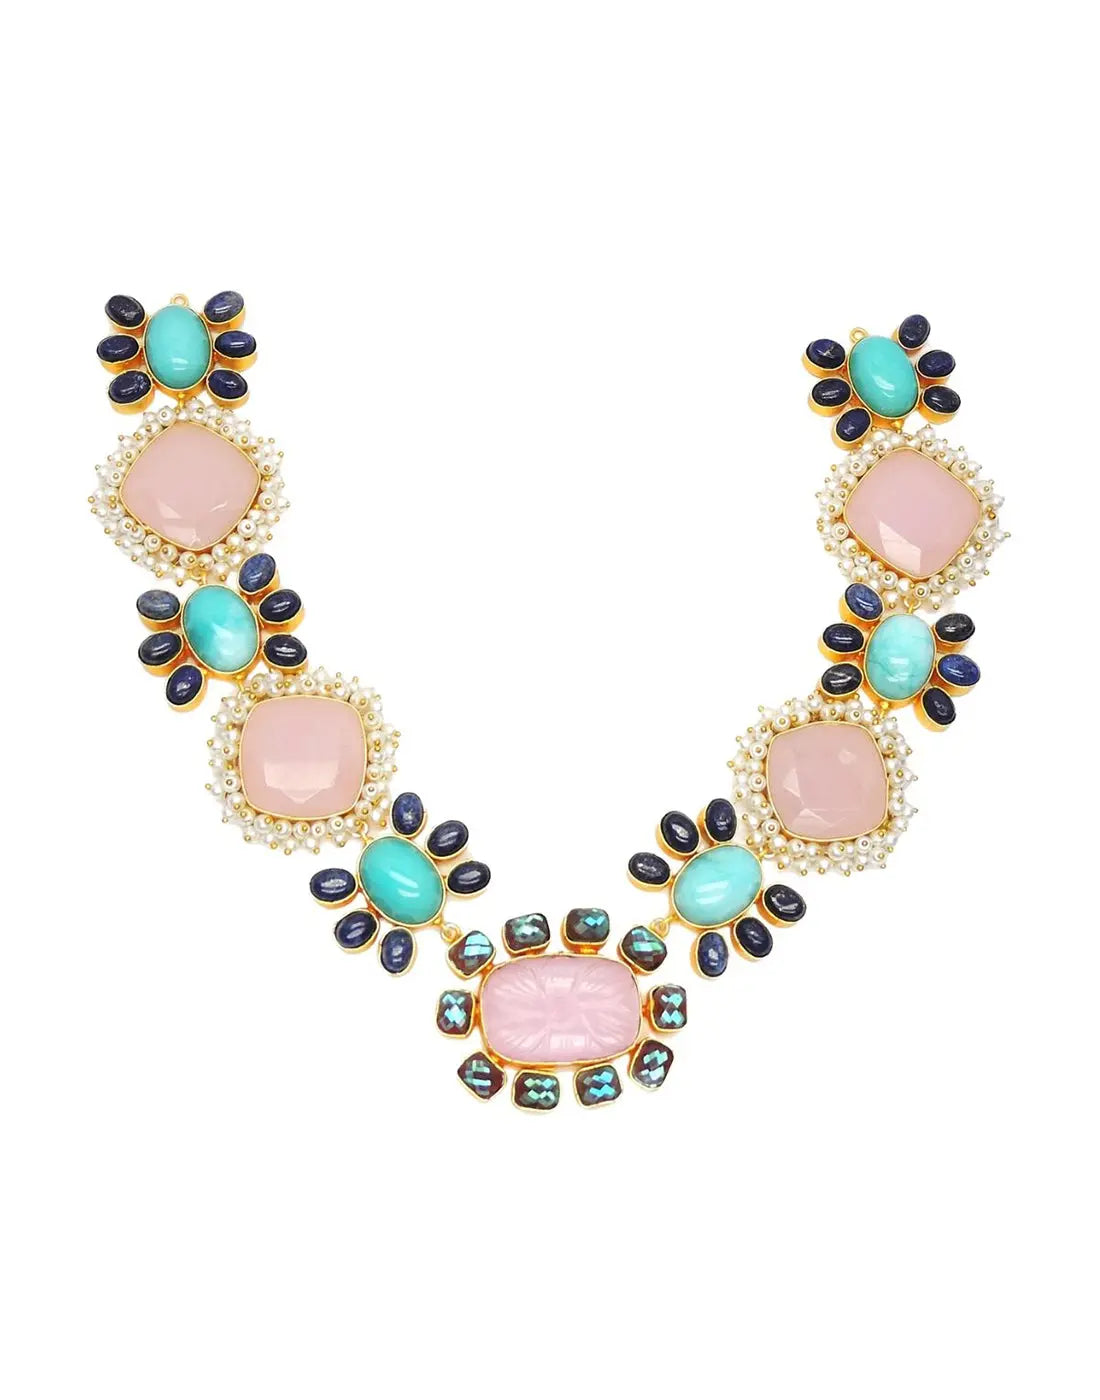 Awamira Necklace- Handcrafted Jewellery from Dori